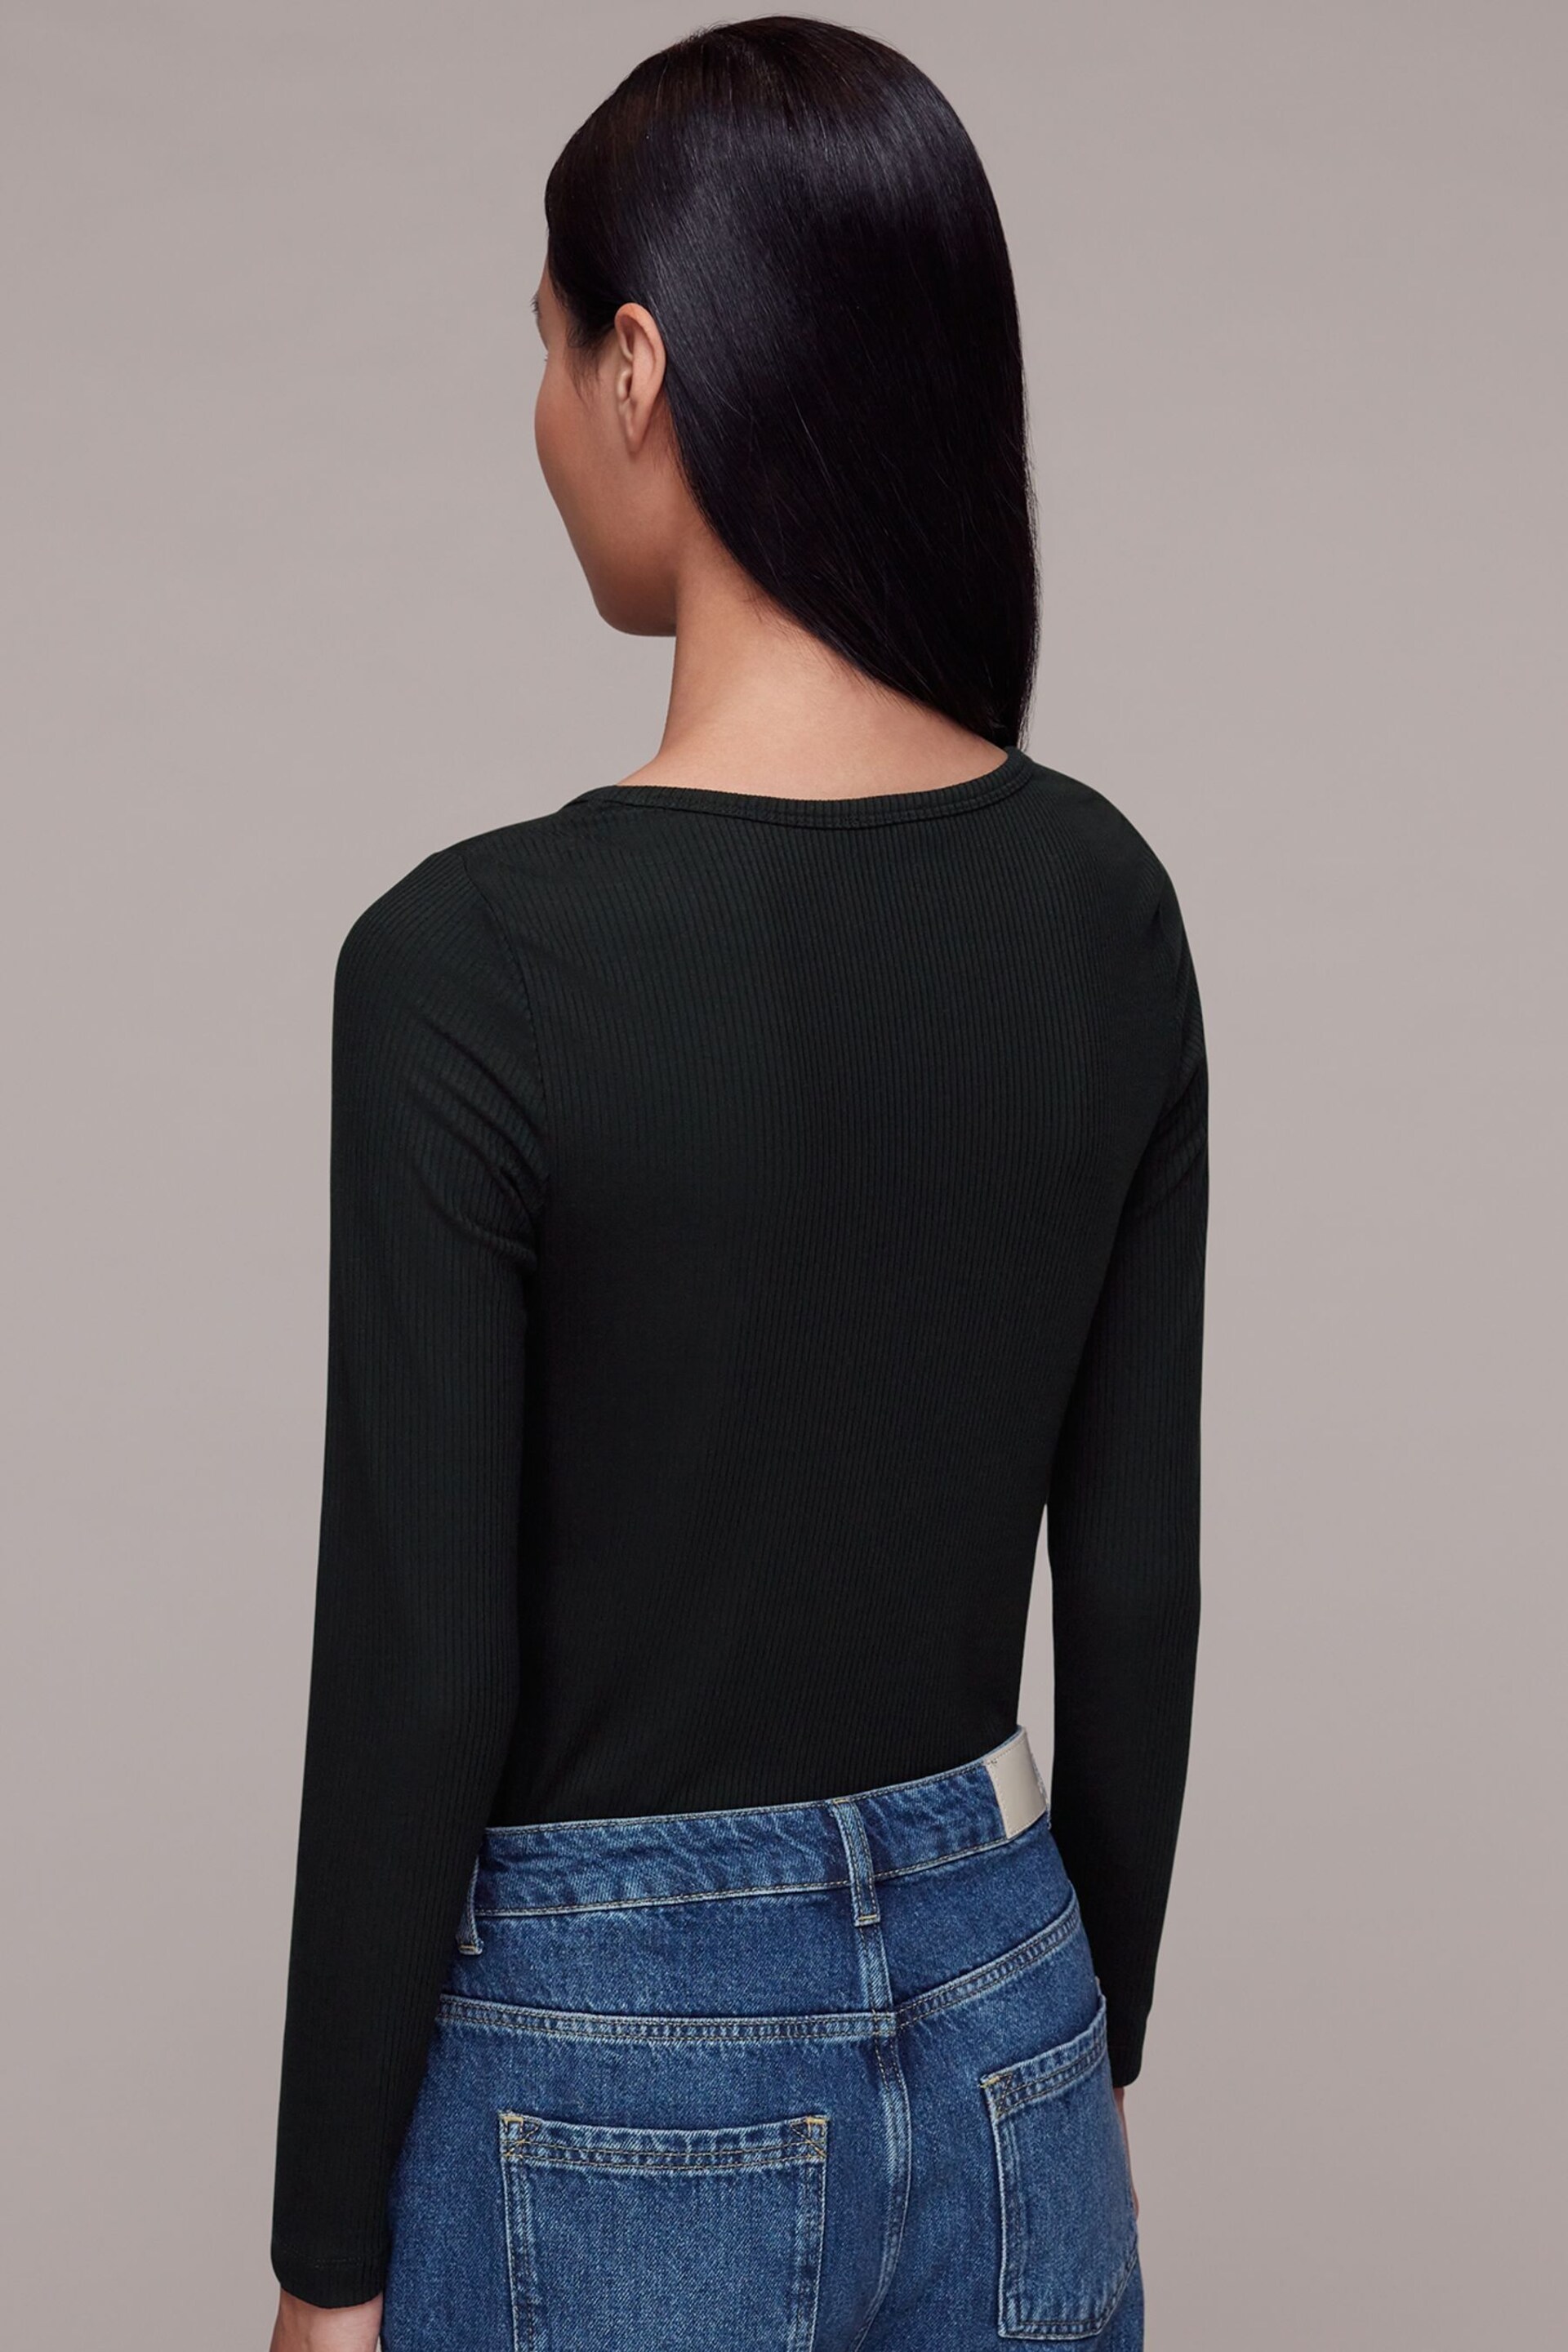 Whistles Ribbed Black Top - Image 2 of 5